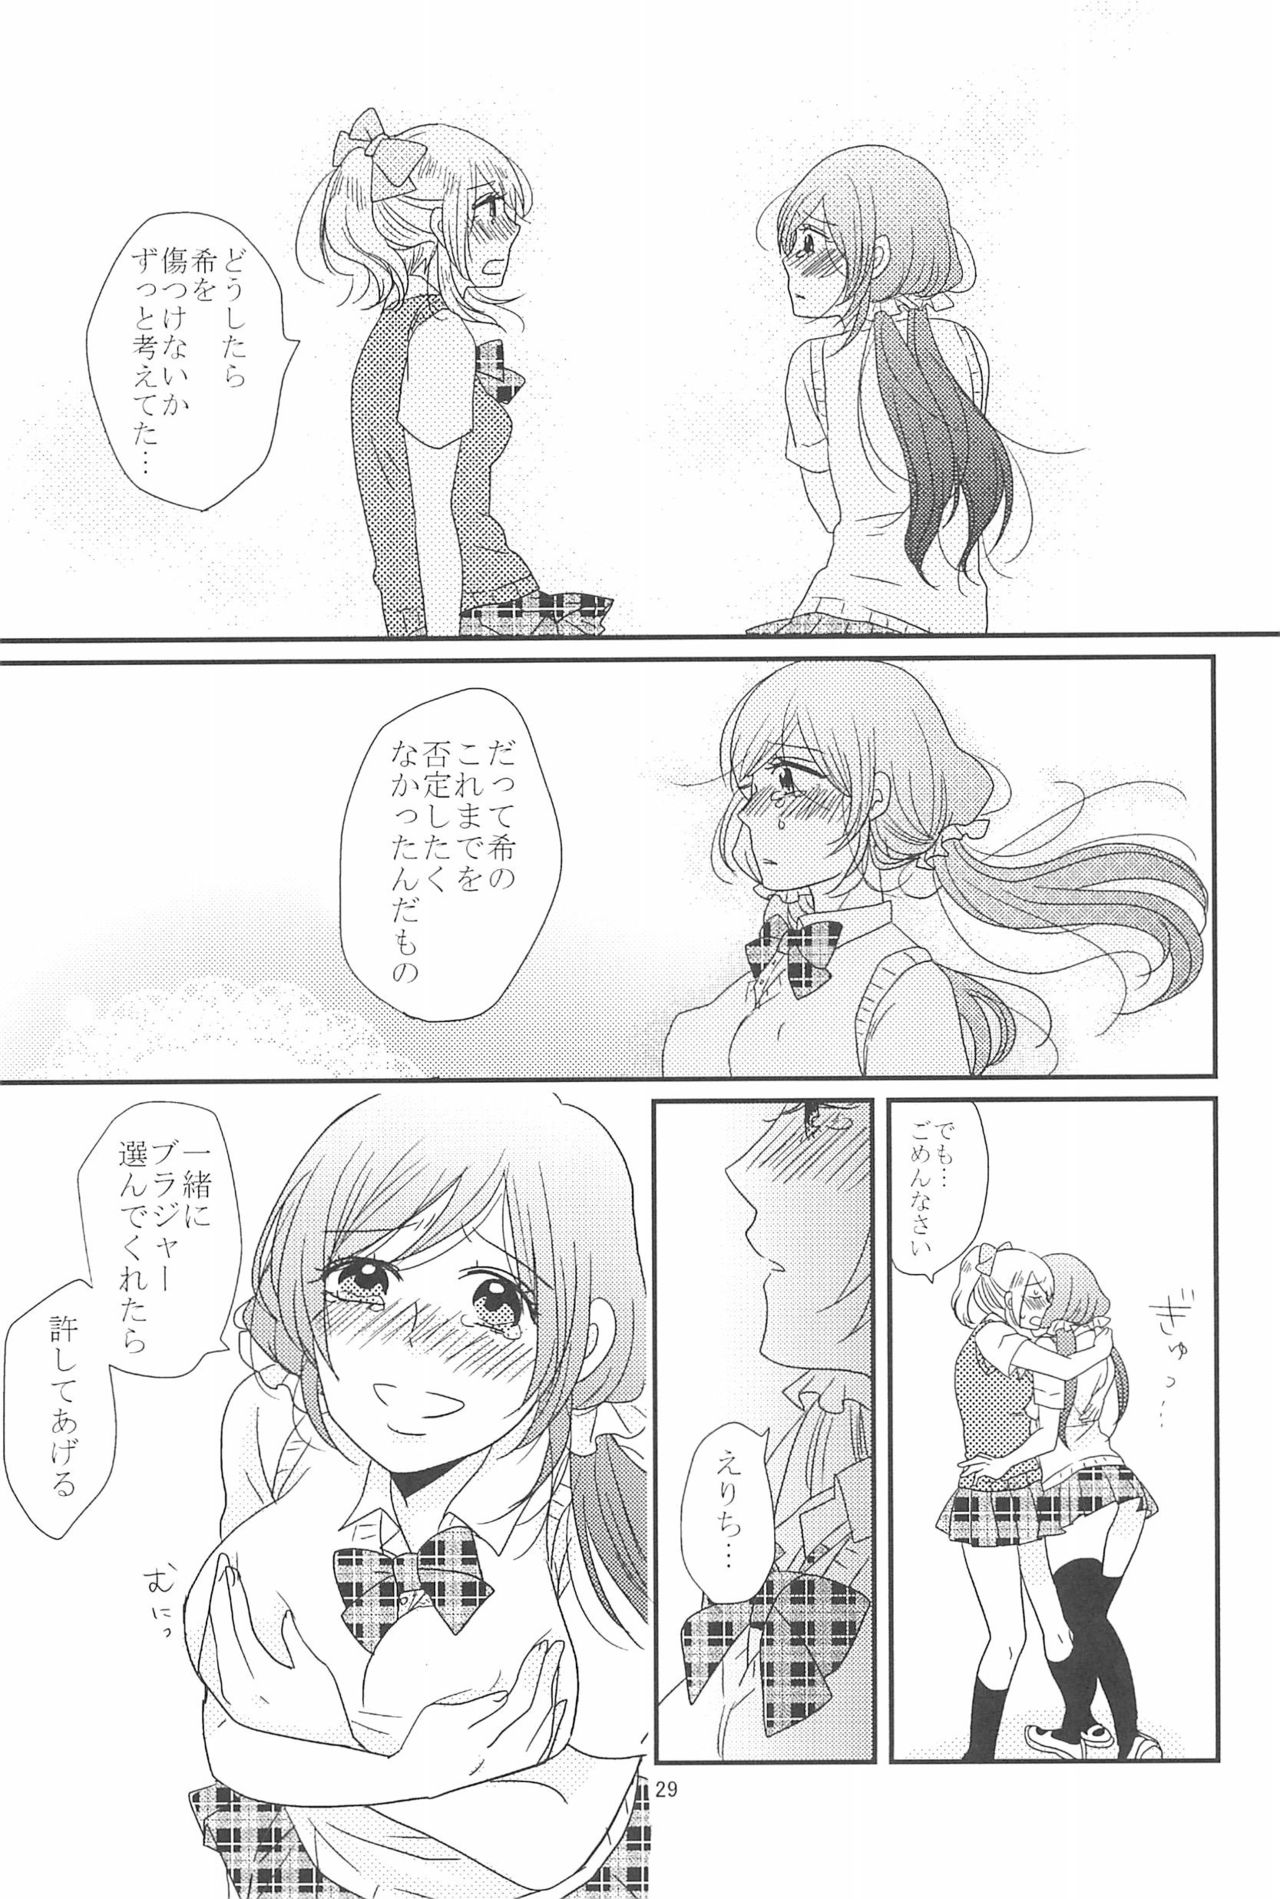 (C90) [BK*N2 (Mikawa Miso)] HAPPY GO LUCKY DAYS (Love Live!) page 33 full